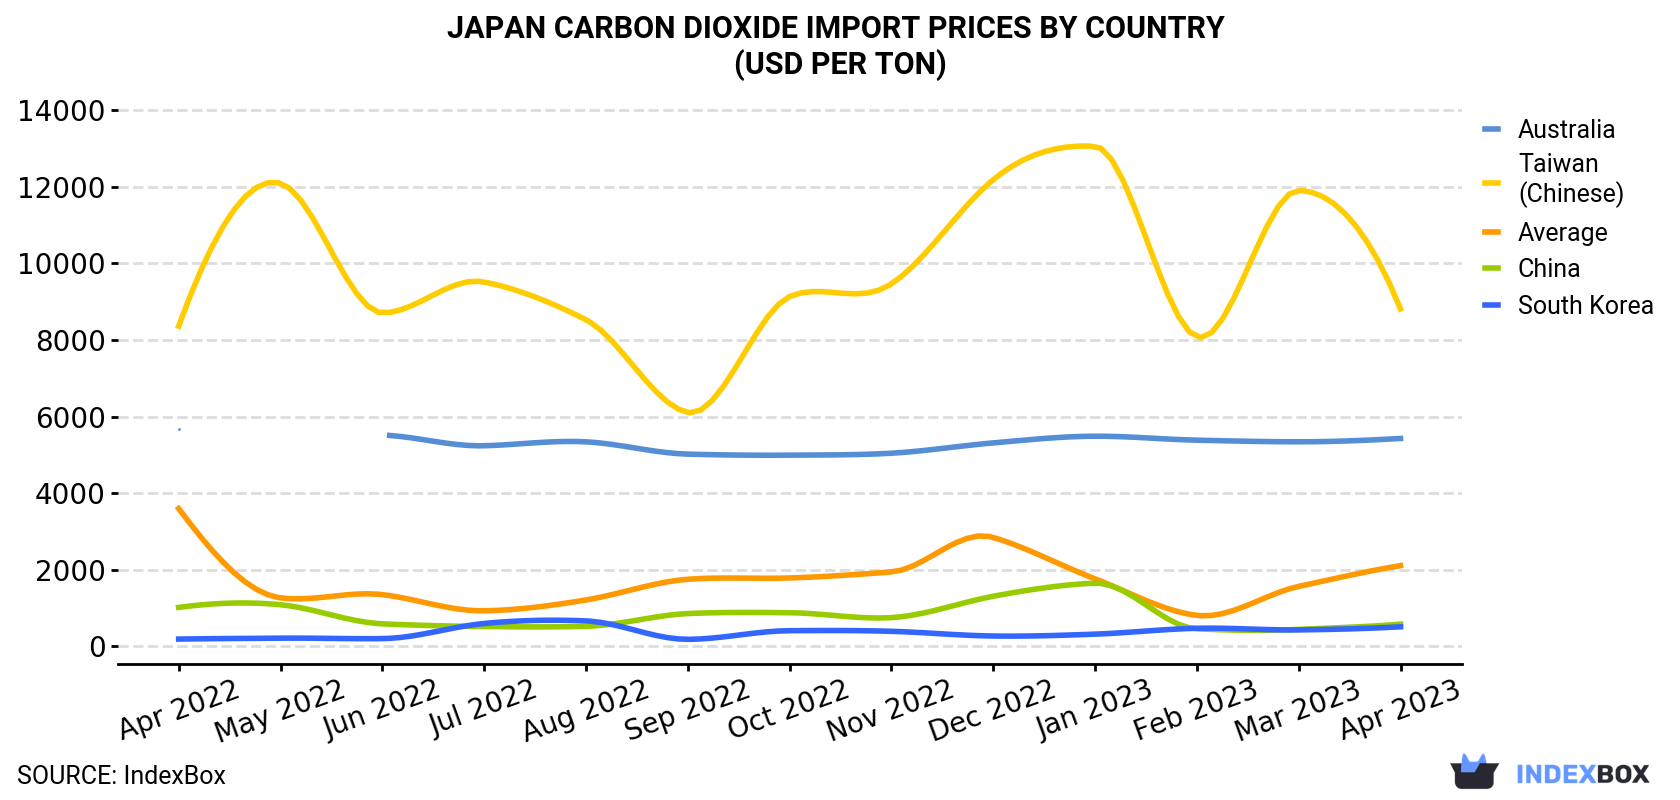 Japan Carbon Dioxide Import Prices By Country (USD Per Ton)